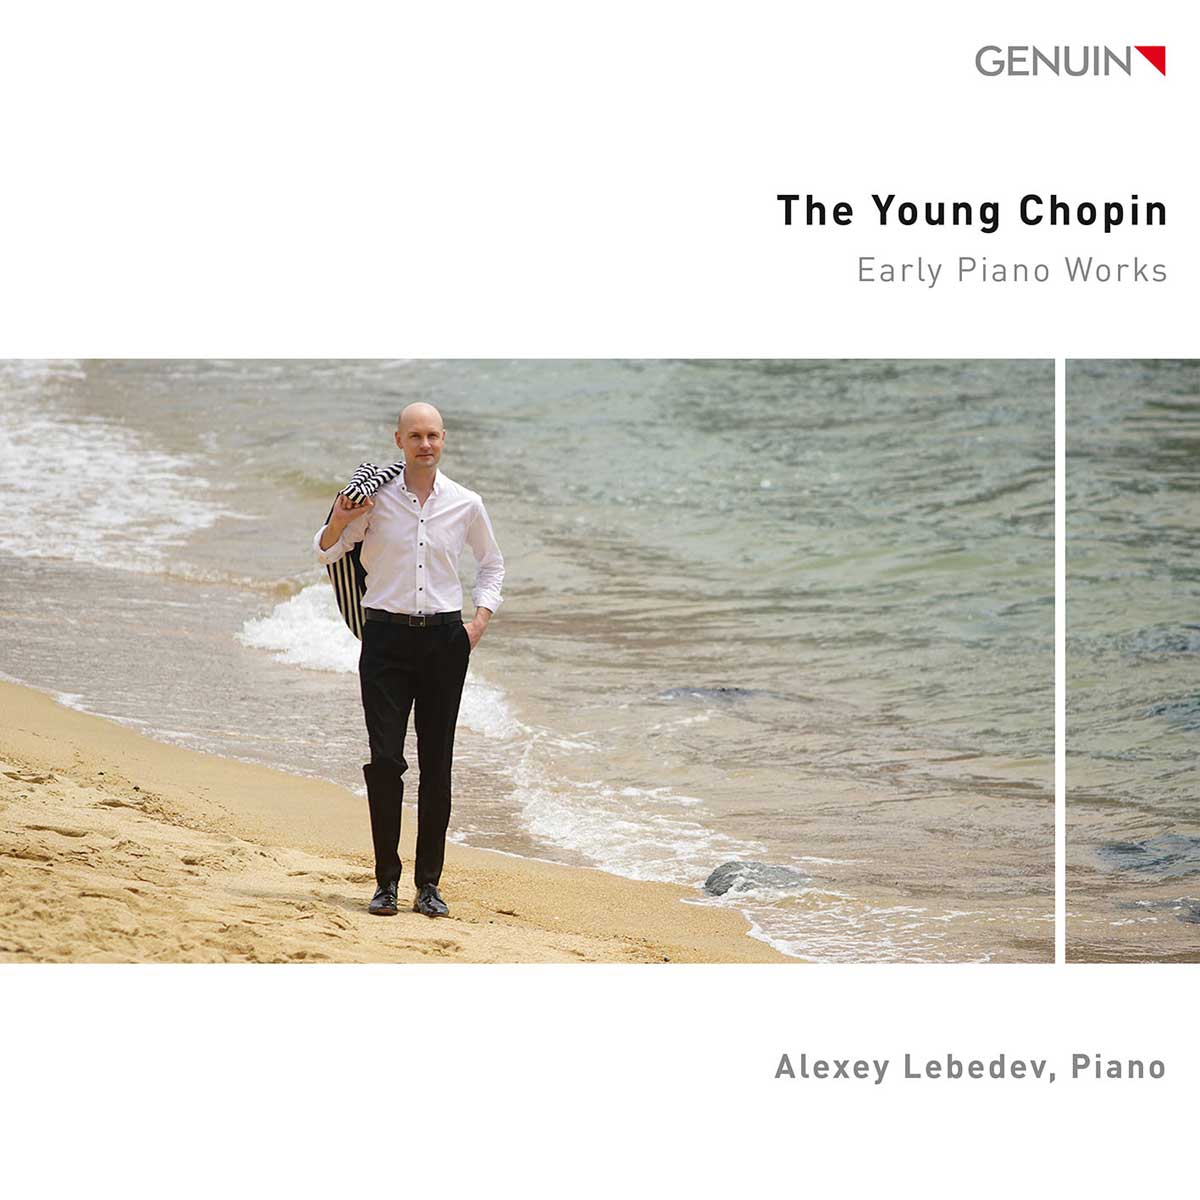 CD album cover 'The Young Chopin' (GEN 23814) with Alexey Lebedev